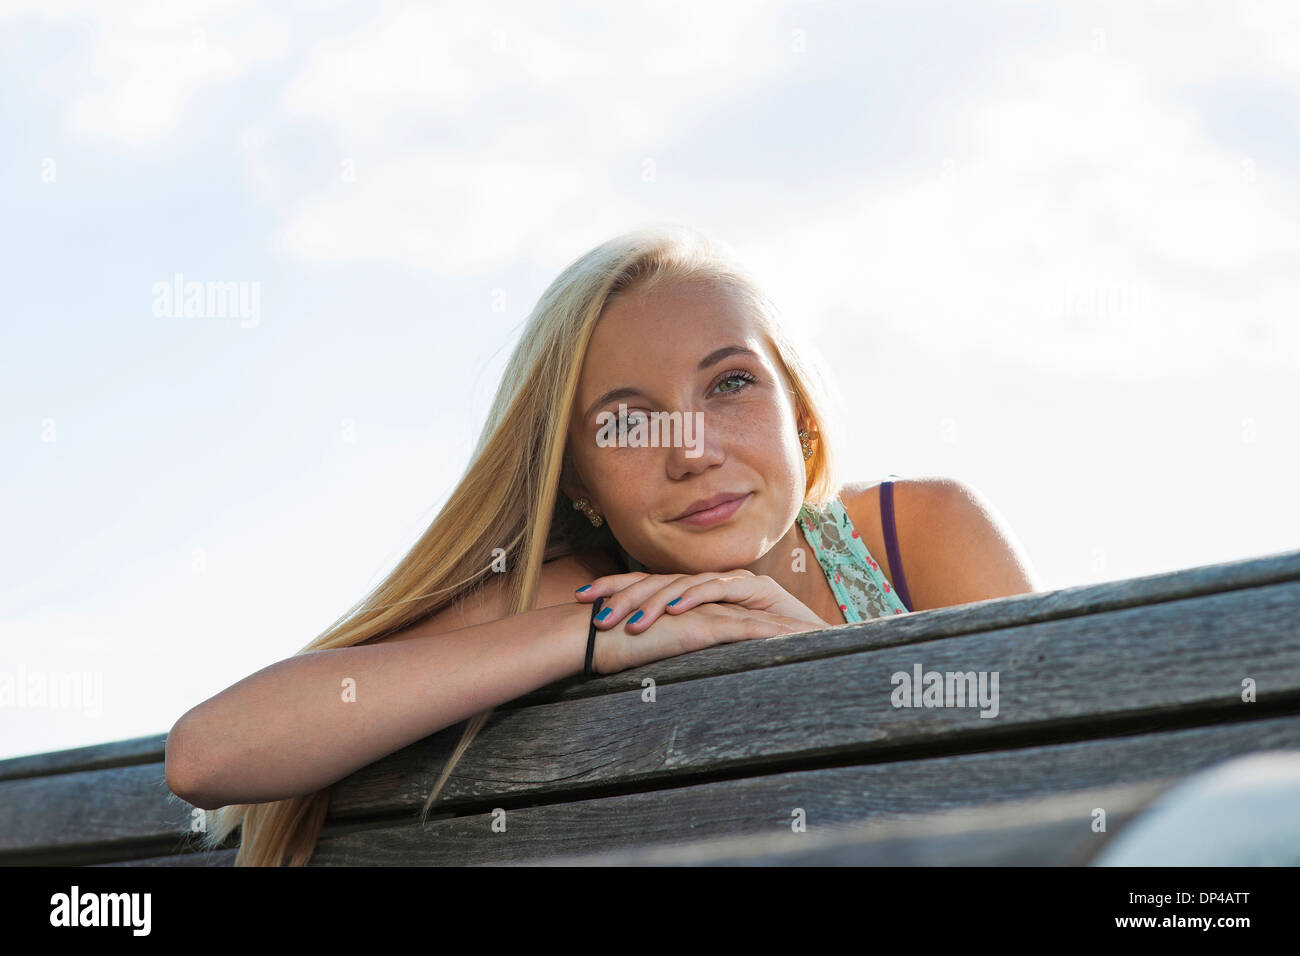 Portrait of teenage girl sitting on bench outdoors, looking at camera, Germany Stock Photo